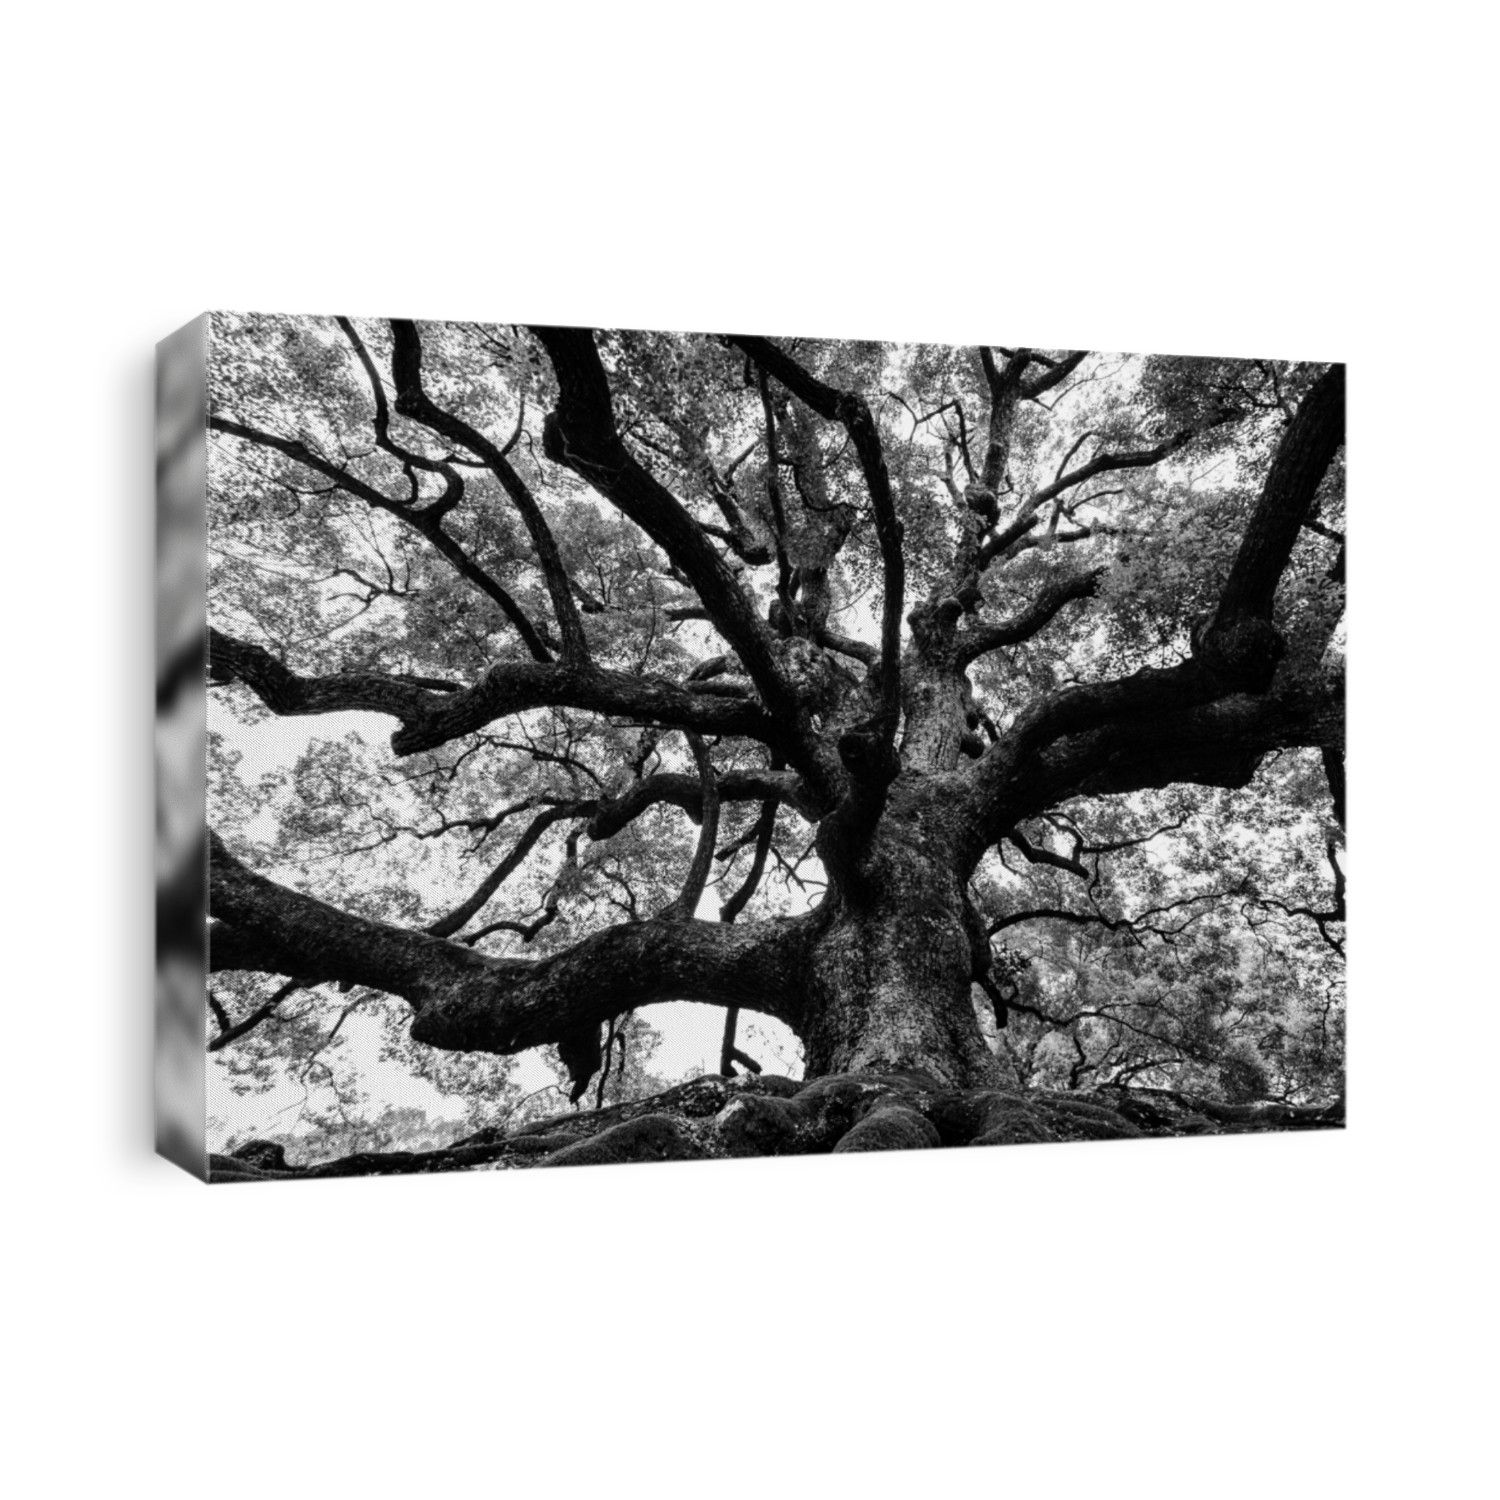 Ancient oak tree with sturdy roots and mighty branches in high contrast black and white